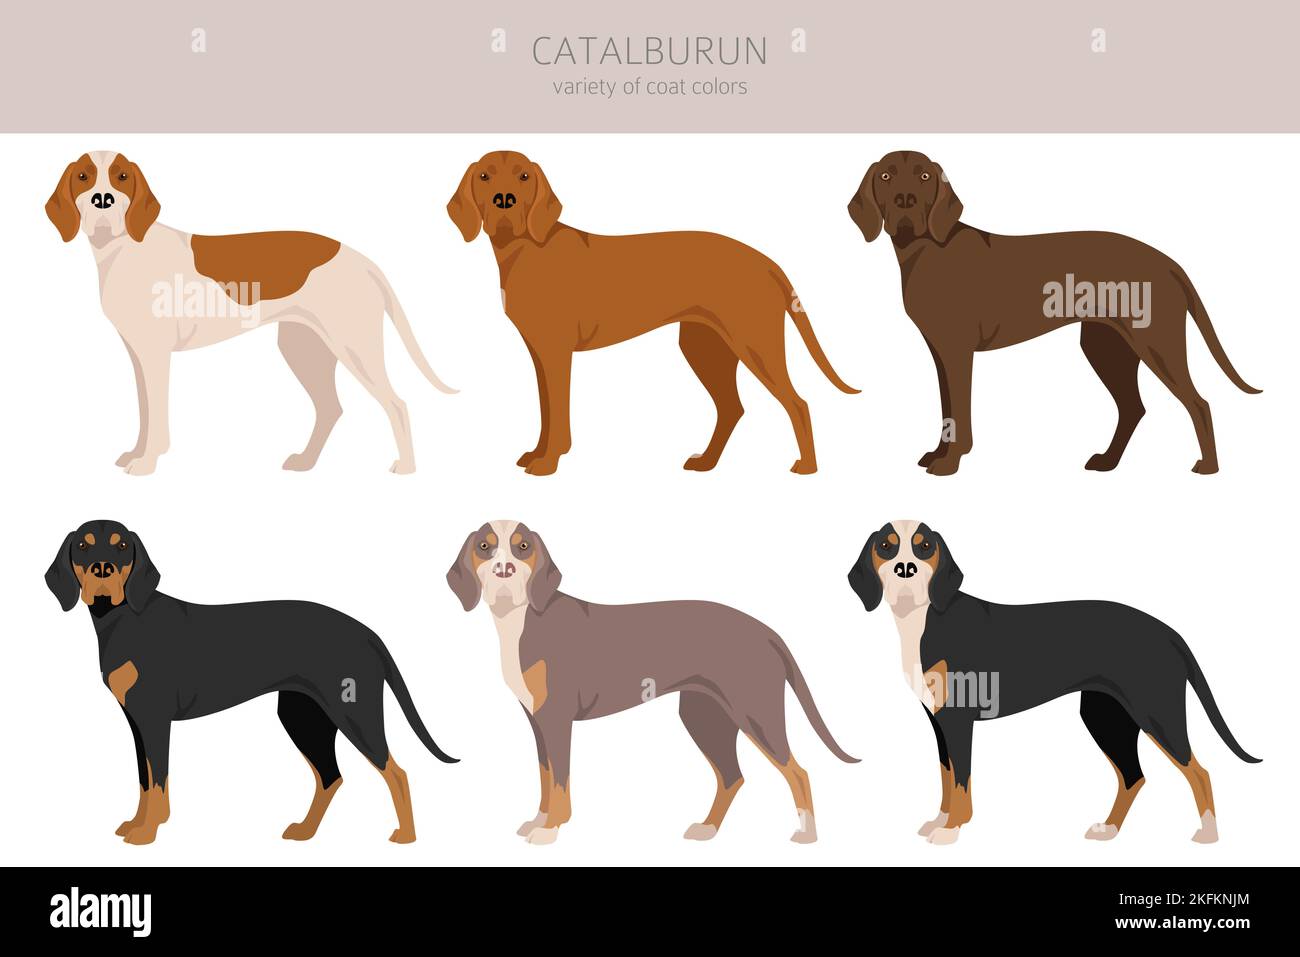 Catalburun, Turkish double nose Pointer clipart. Different poses, coat colors set.  Vector illustration Stock Vector